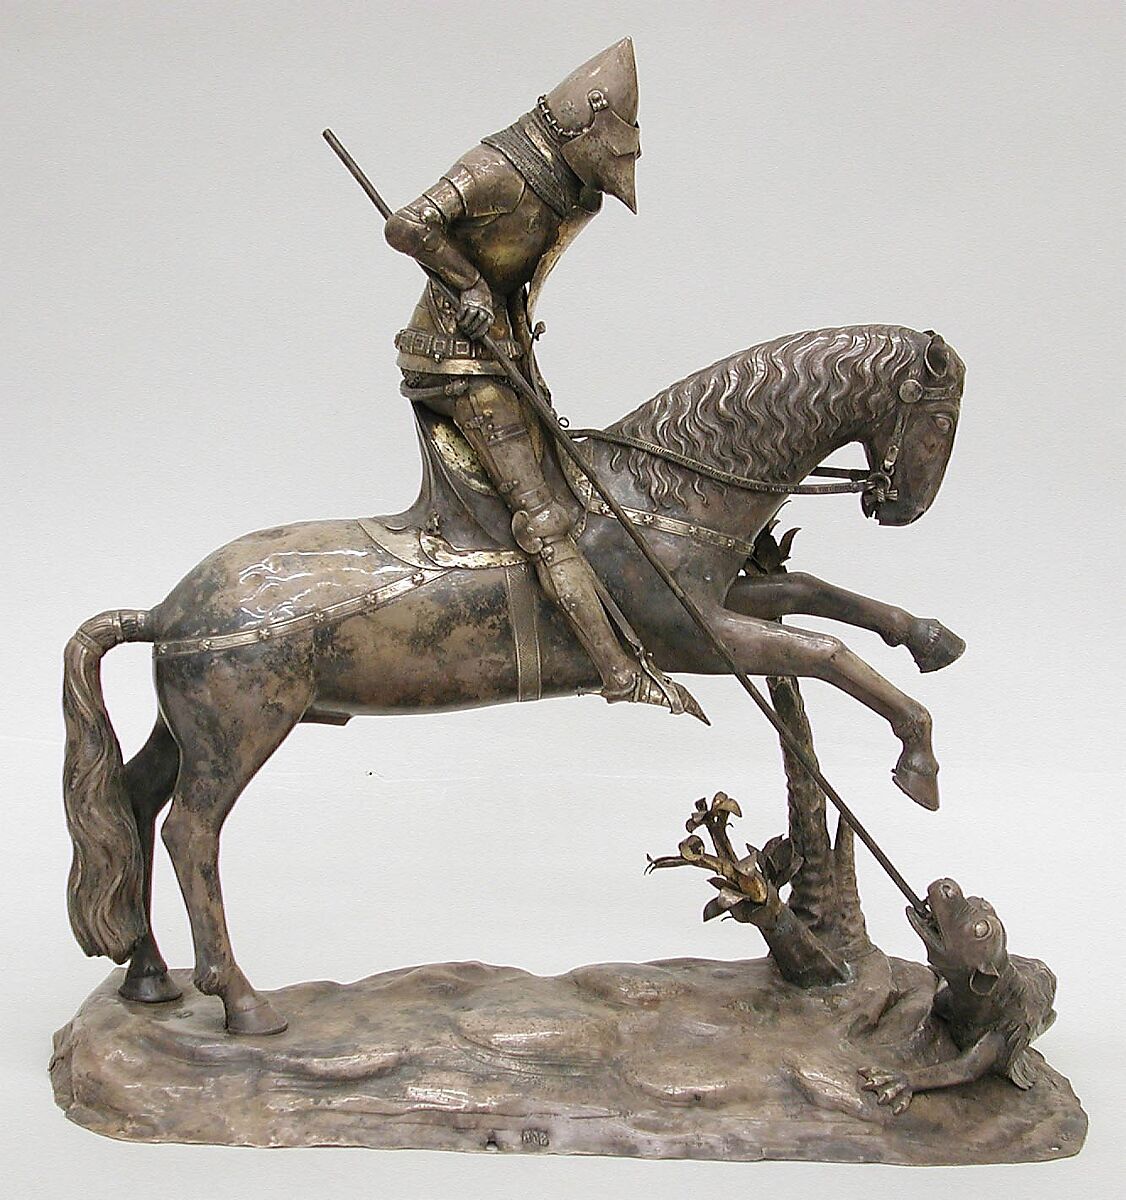 St. George and the Dragon, Silver, possibly Italian or French 